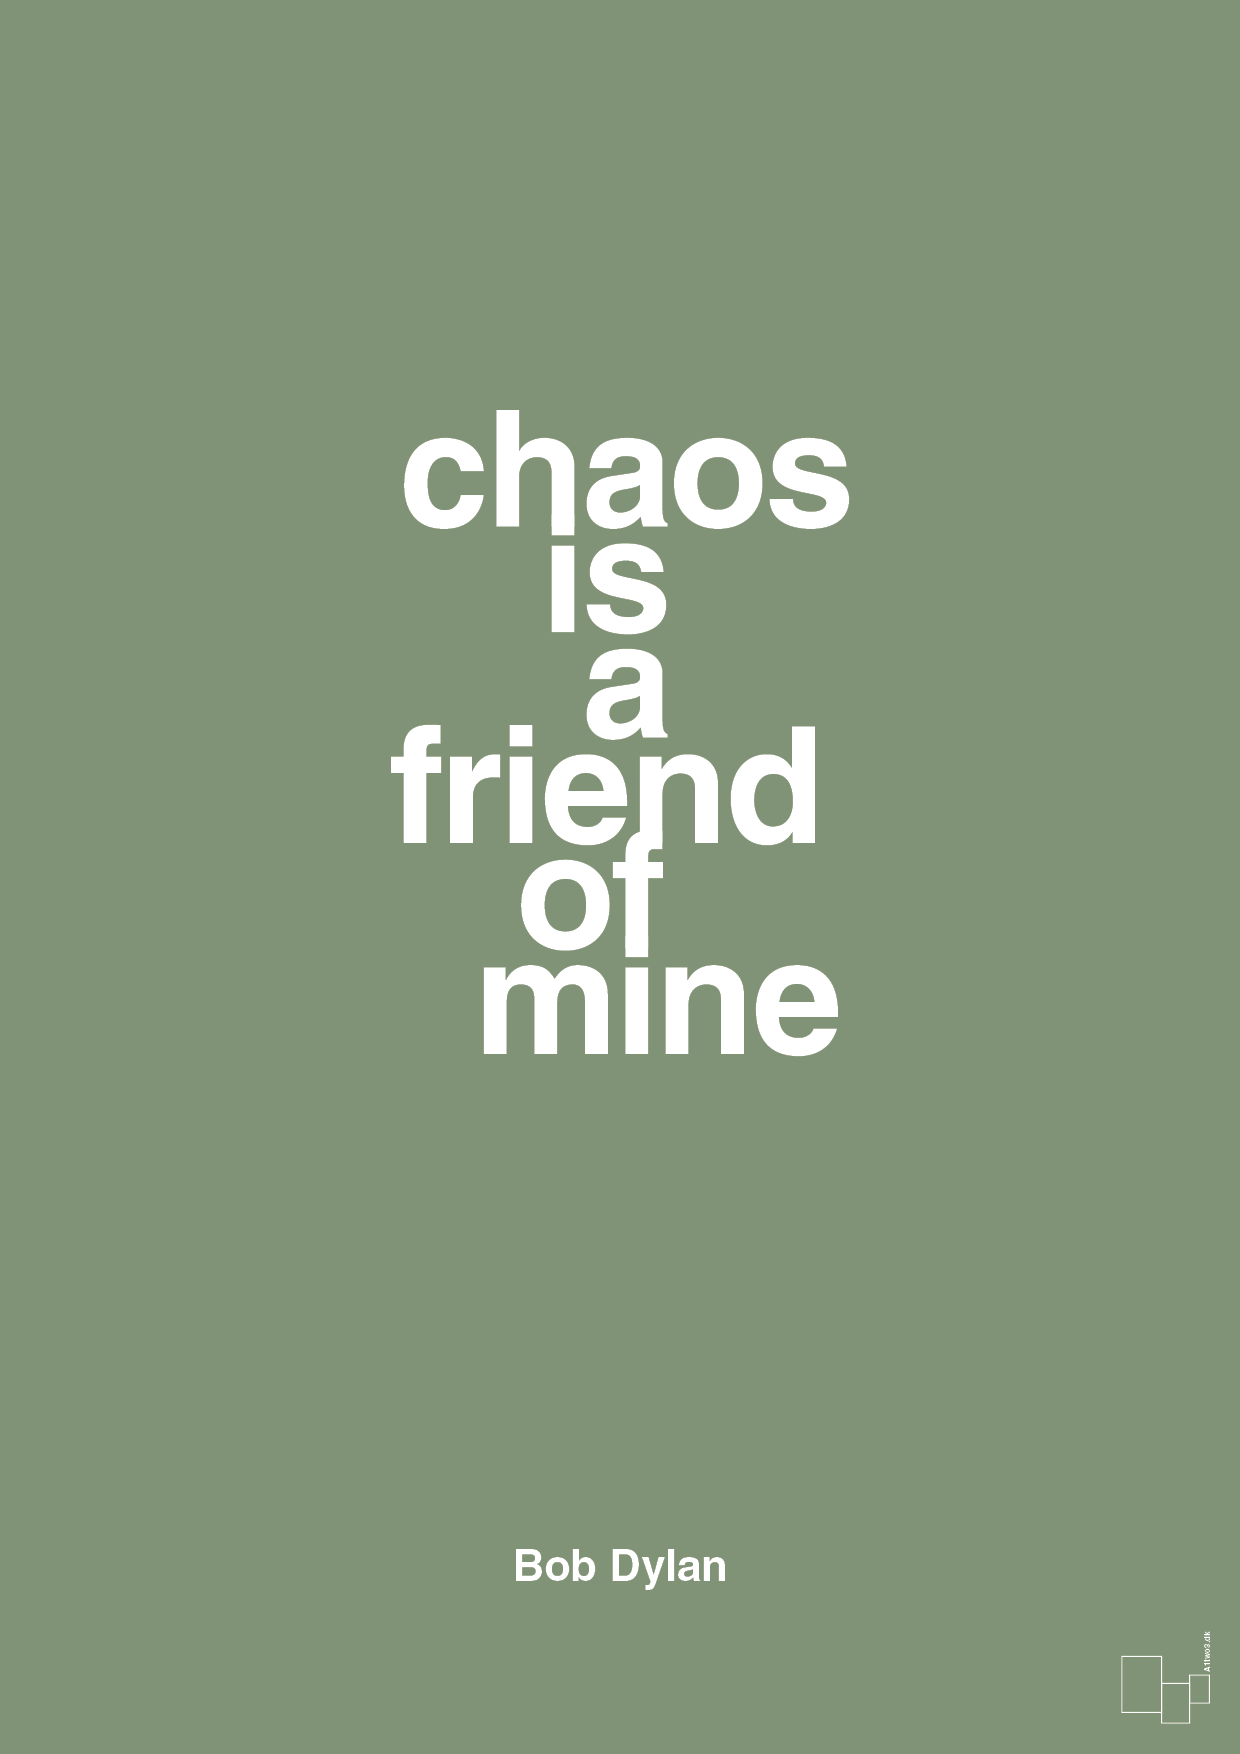 chaos is a friend of mine - Plakat med Citater i Jade